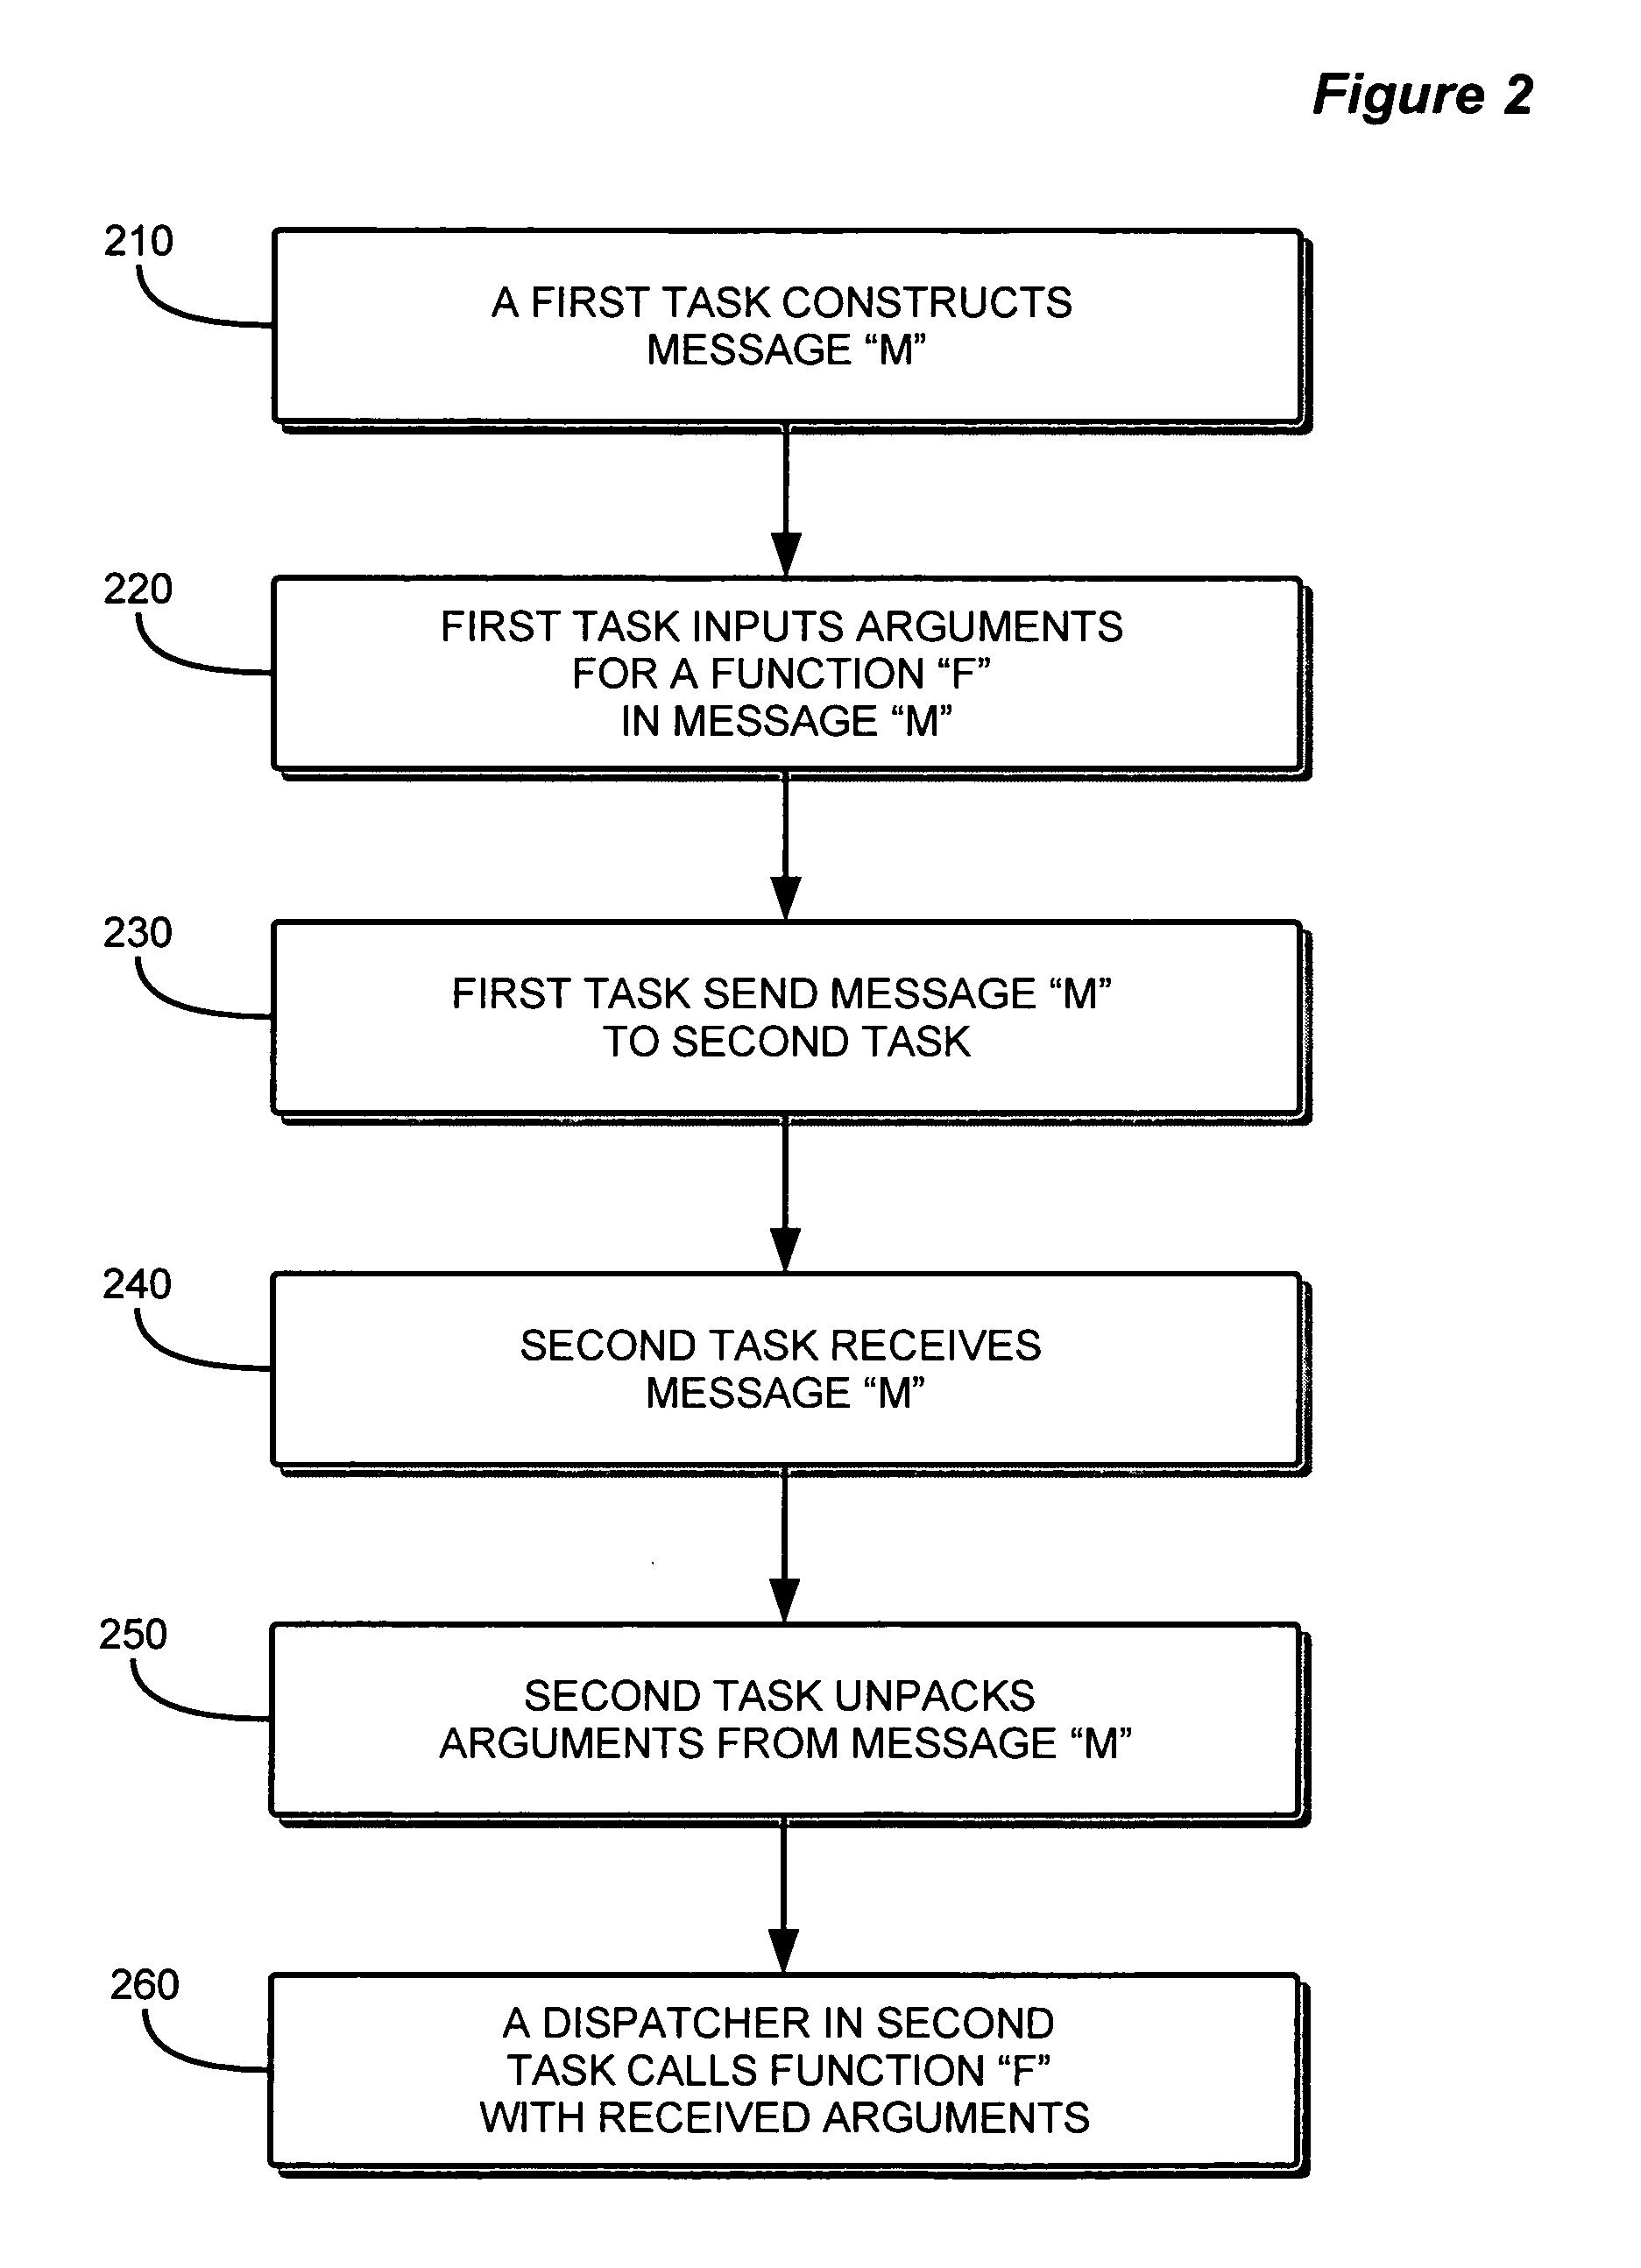 Method and apparatus for implementing task management of computer operations